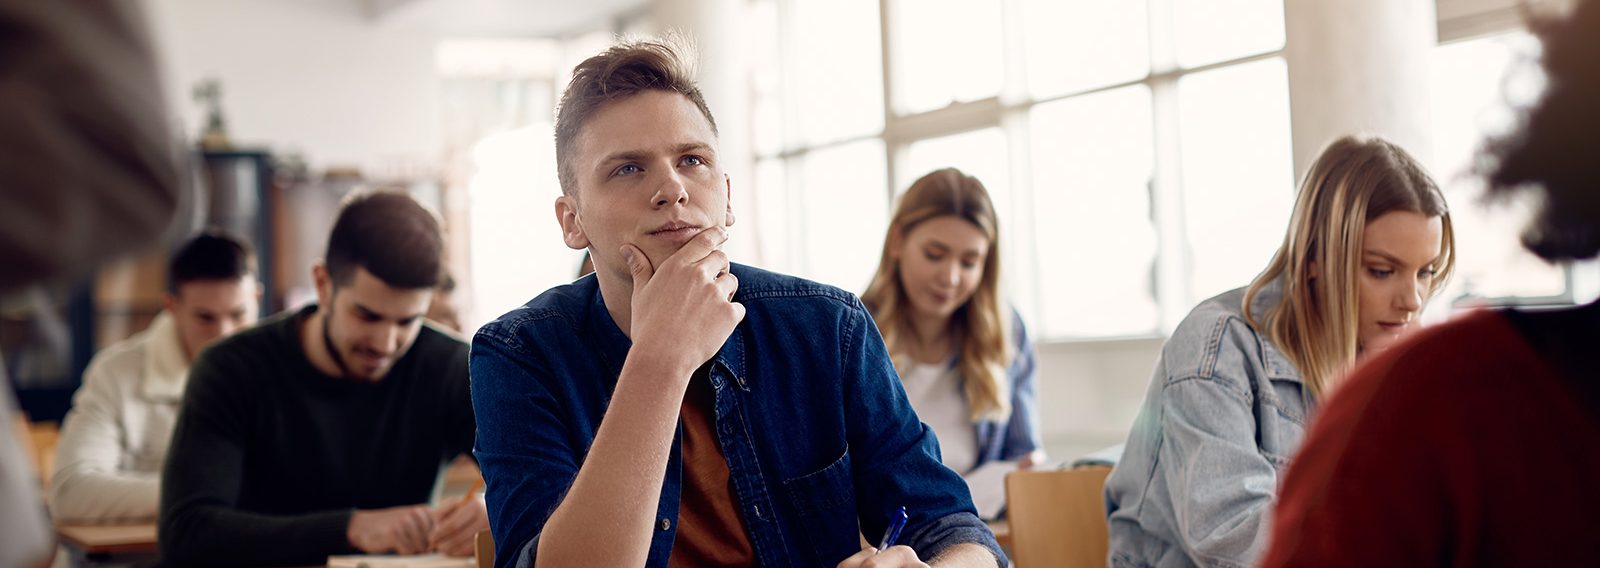 A male student looks deep in thought in a class setting surrounded by other students